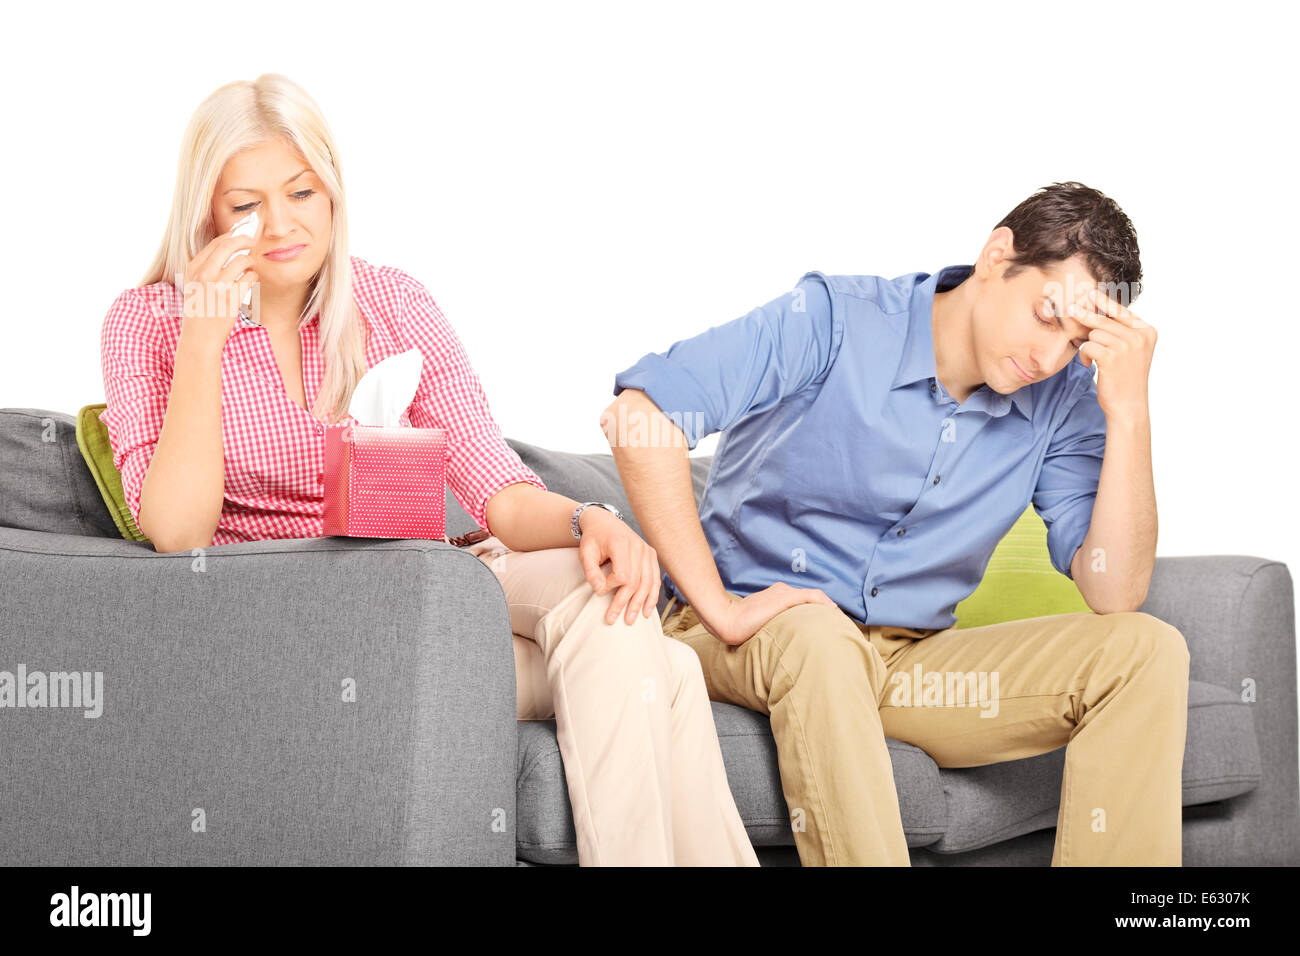 Woman crying after an argument with her boyfriend seated on couch Stock Photo